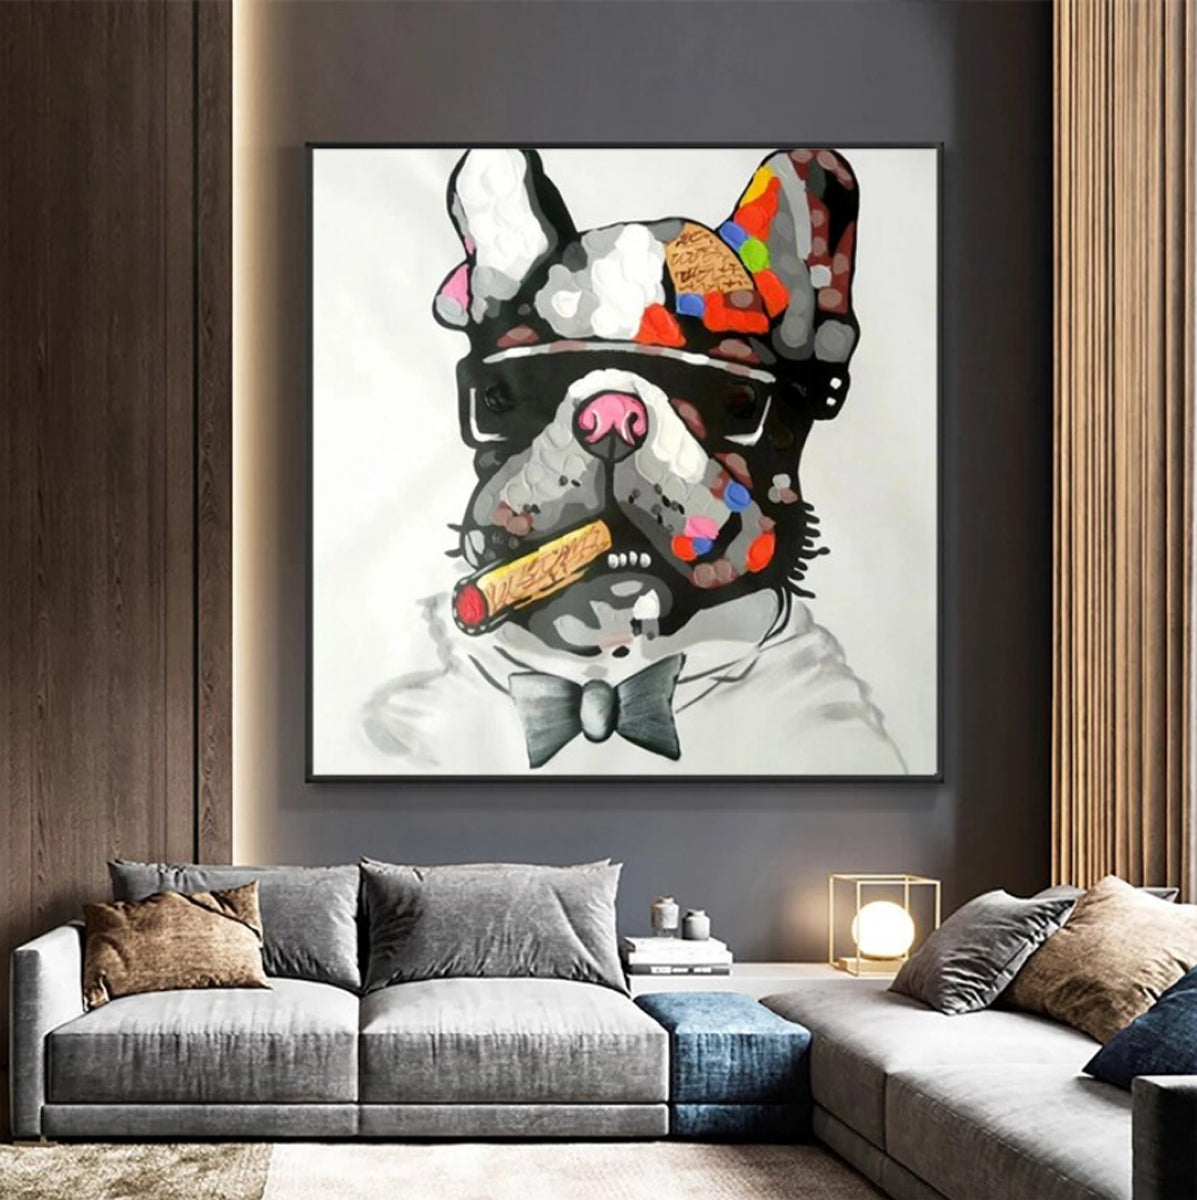 TPFLiving Canvas Funny Poster Abstract, / and – Animal Colorful Traumpreisfabrik Motifs /